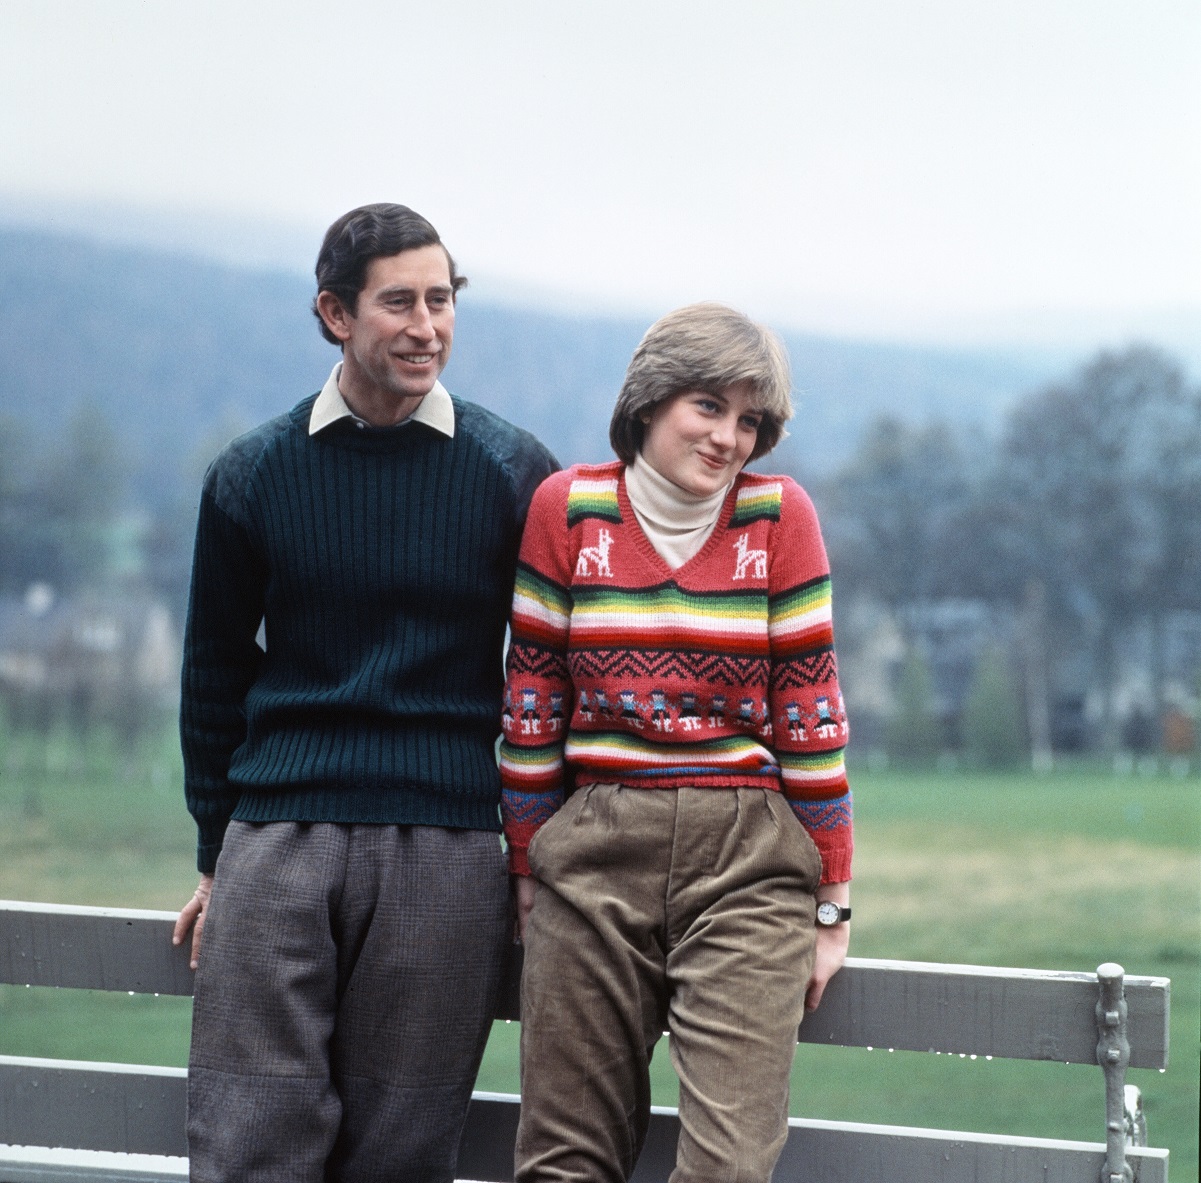 Prince Charles and Lady Diana Spencer dressed casually while vacationing at Balmoral in 1981